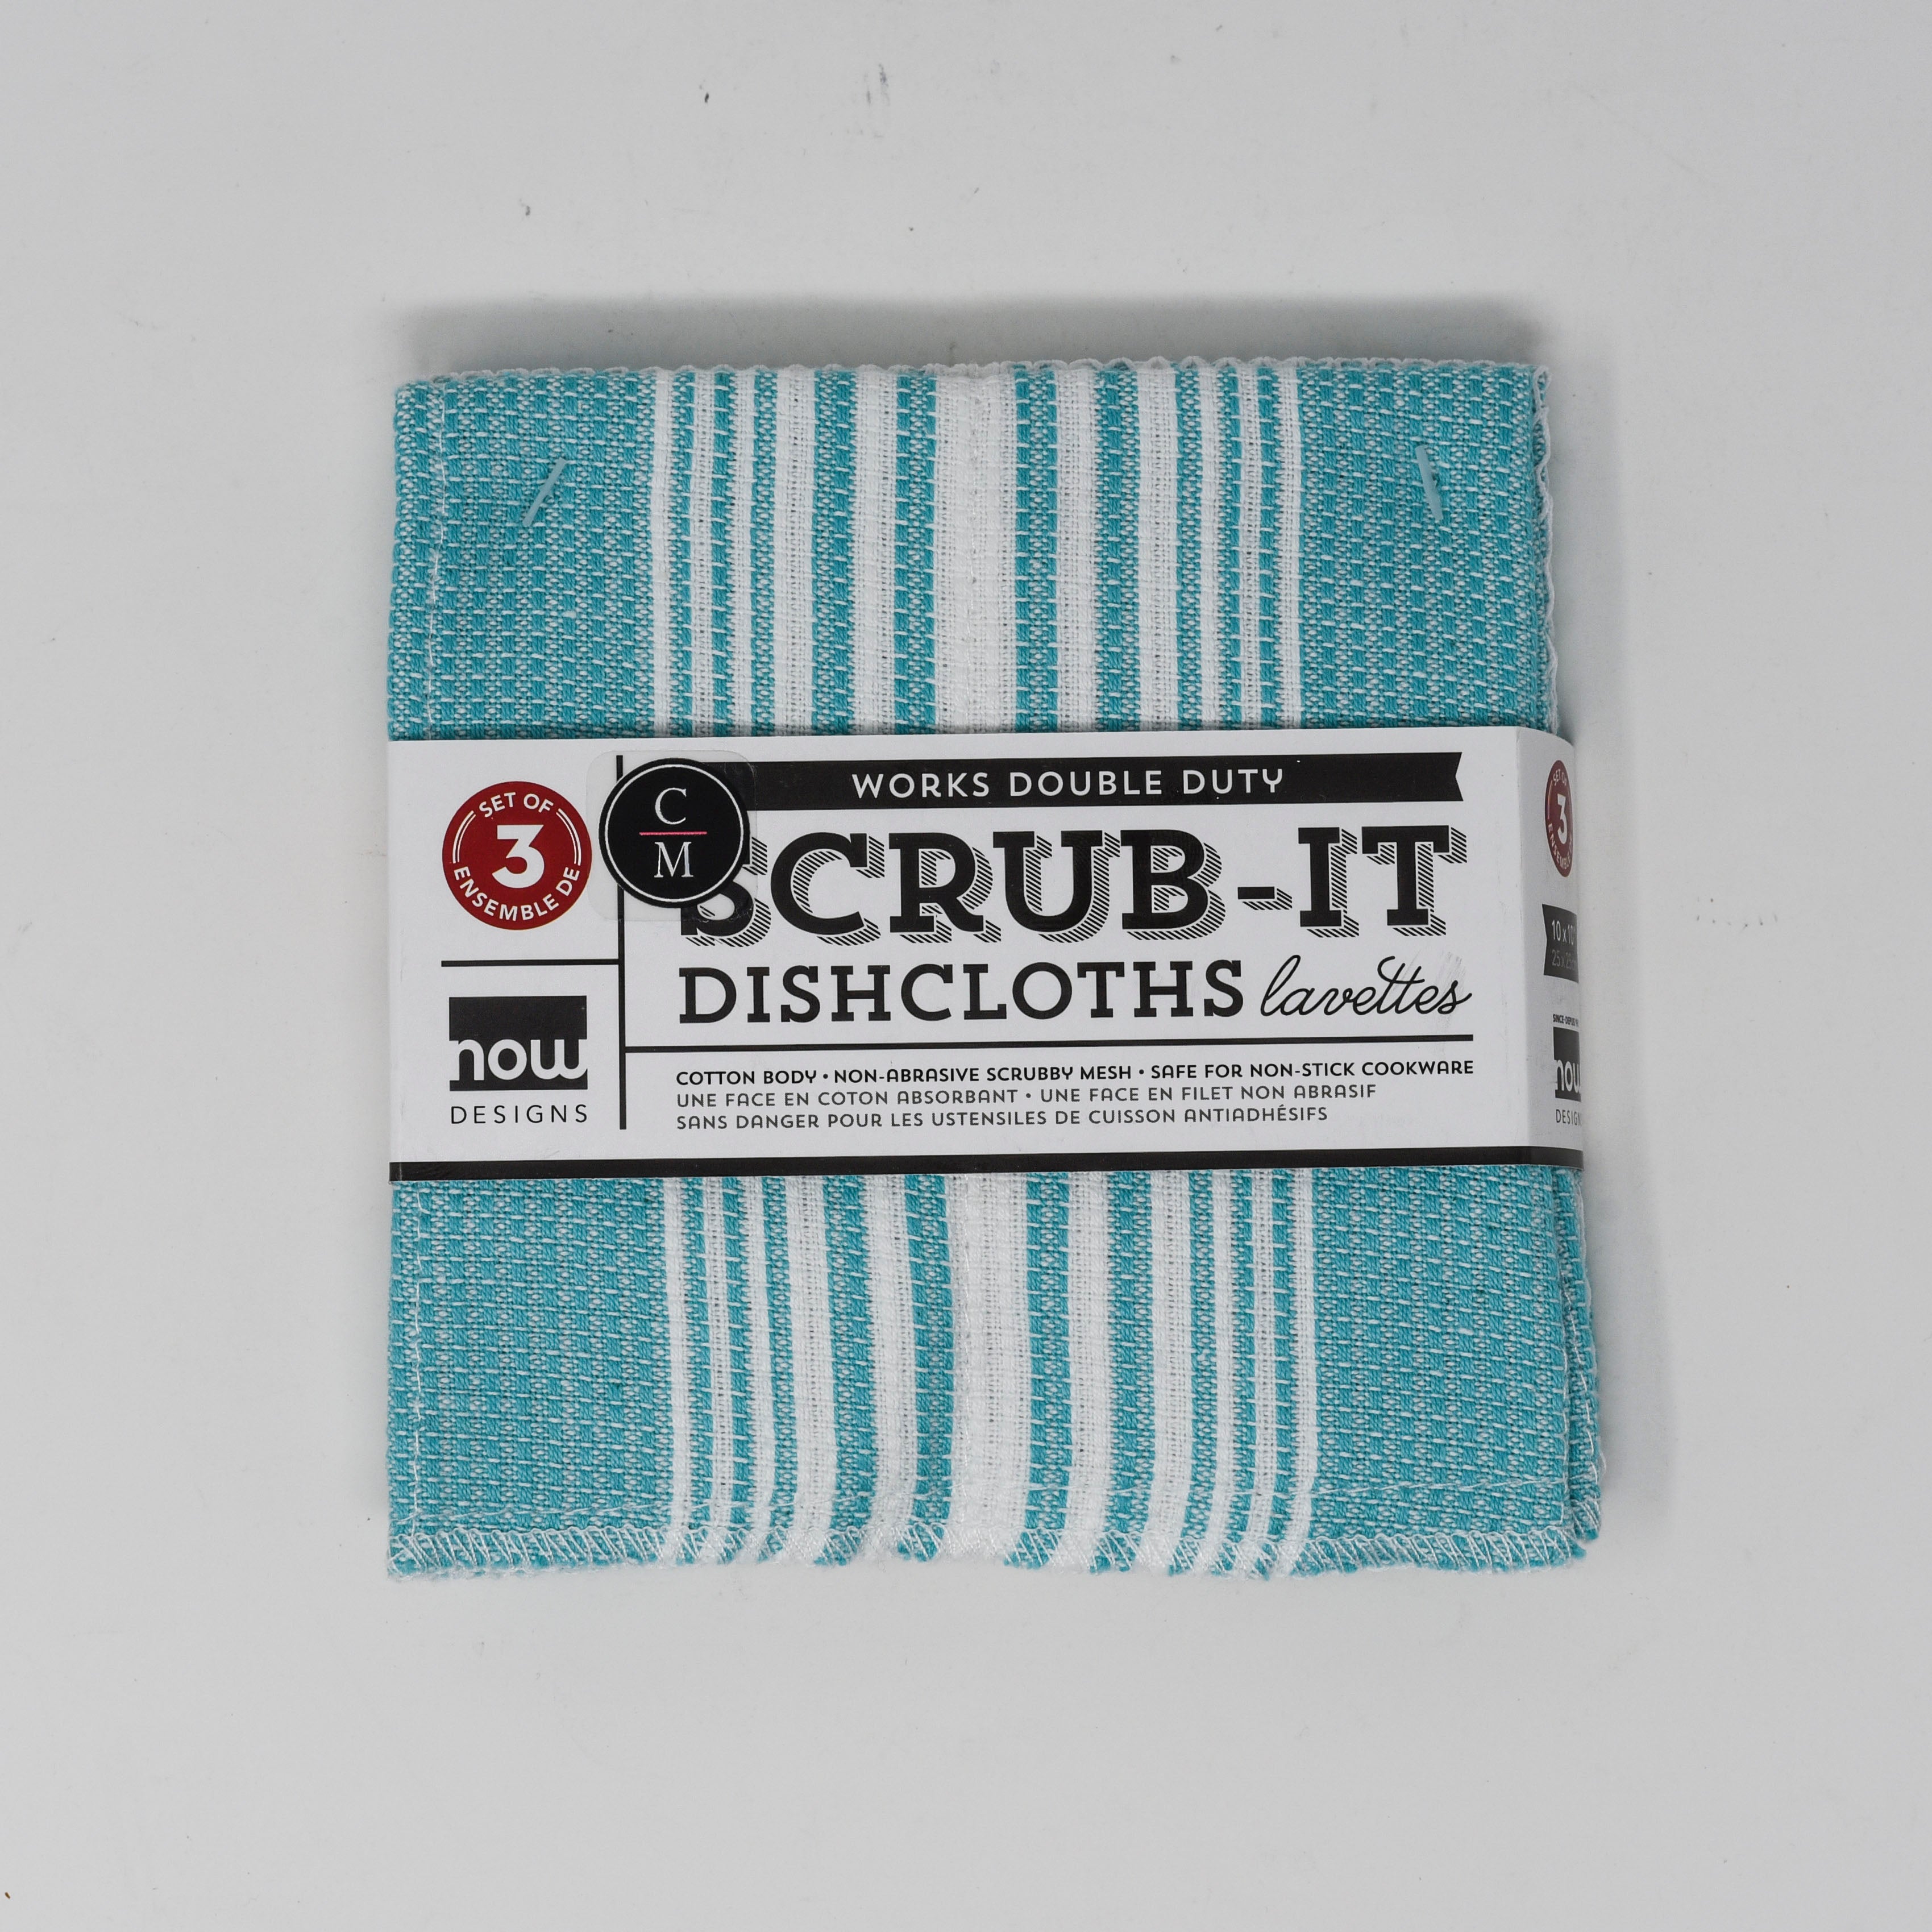 Scrubit Reusable Cleaning Wipes Cleaning Cloth for Kitchen and Office - Dish Cloths for Washing Dishes - Multi Purpose Cleaning Towels (14 x 24 in)